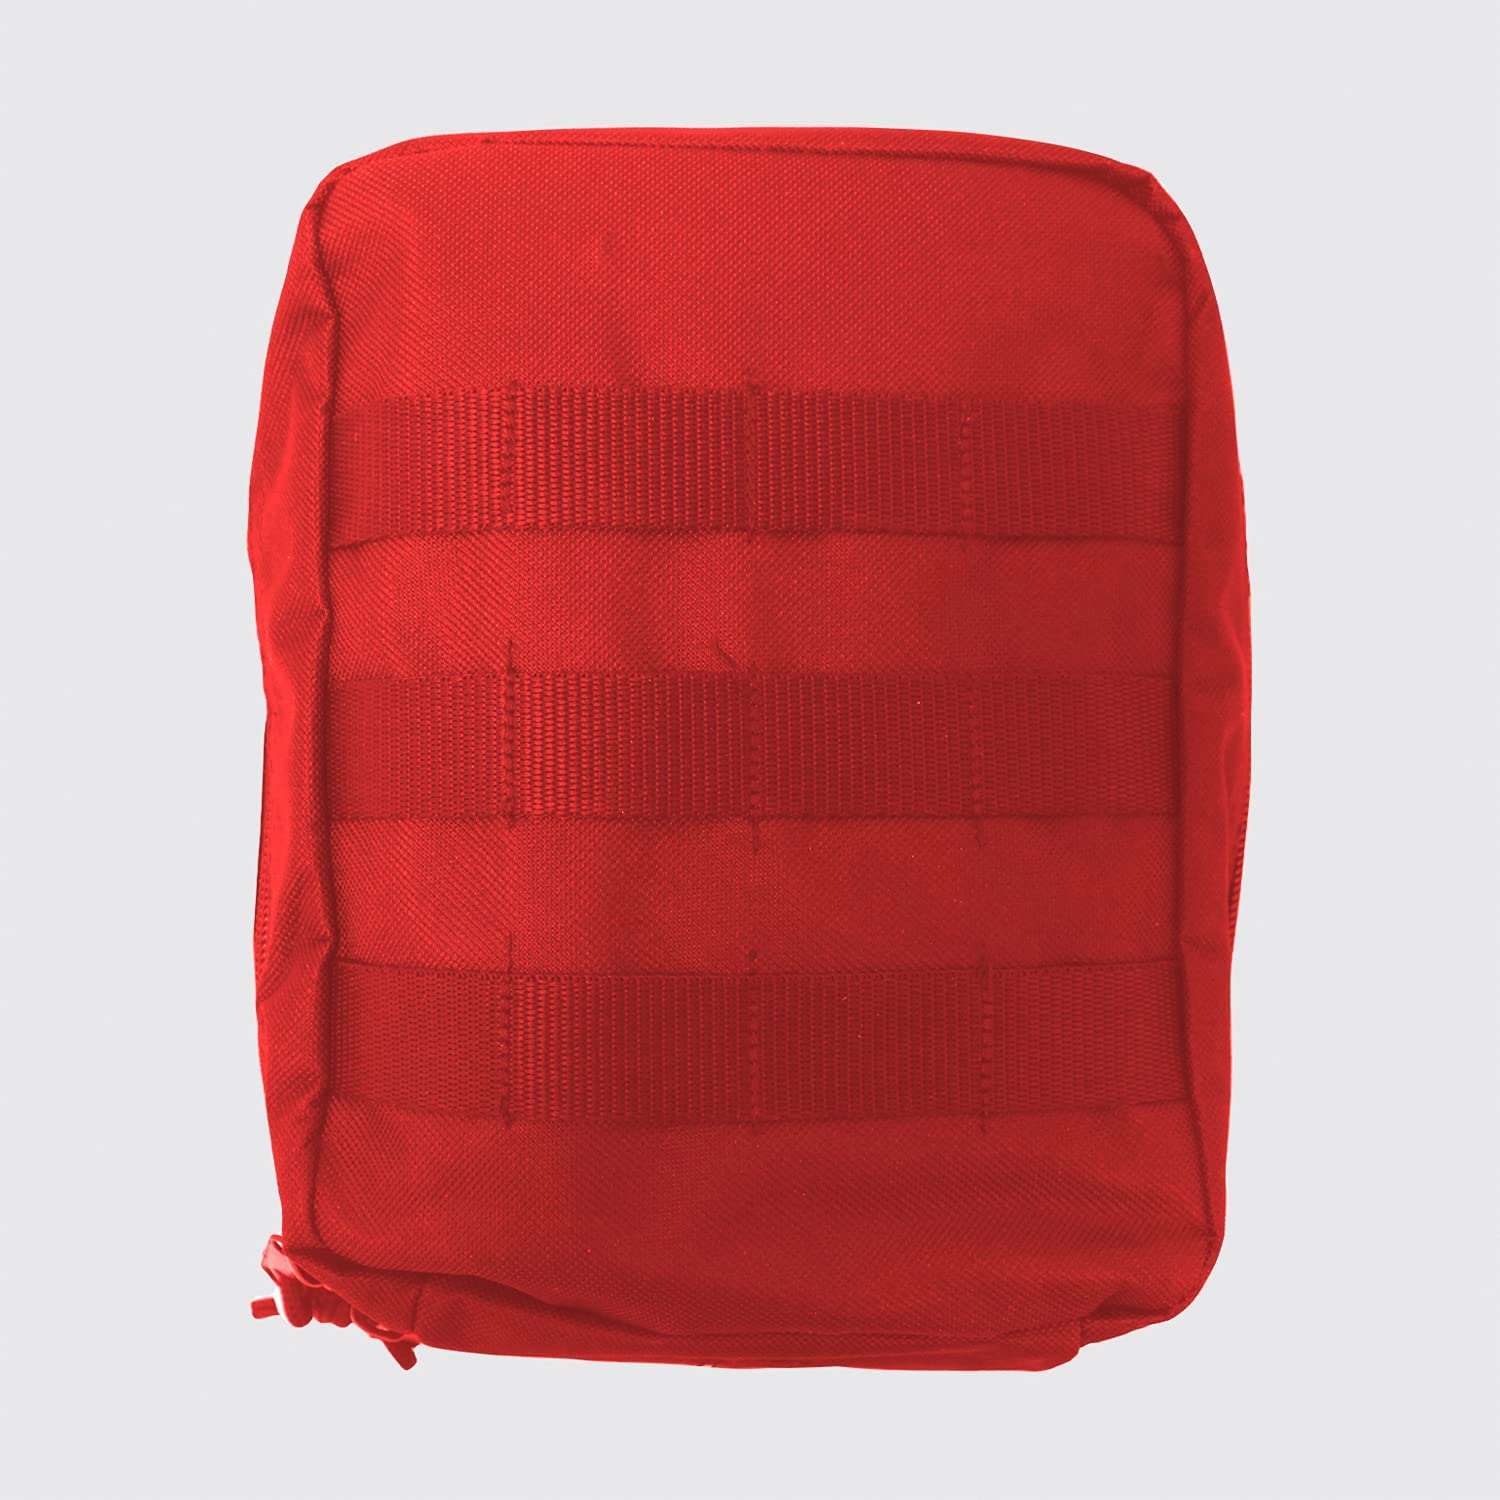 Red Emergency Kit Pouch - 2 